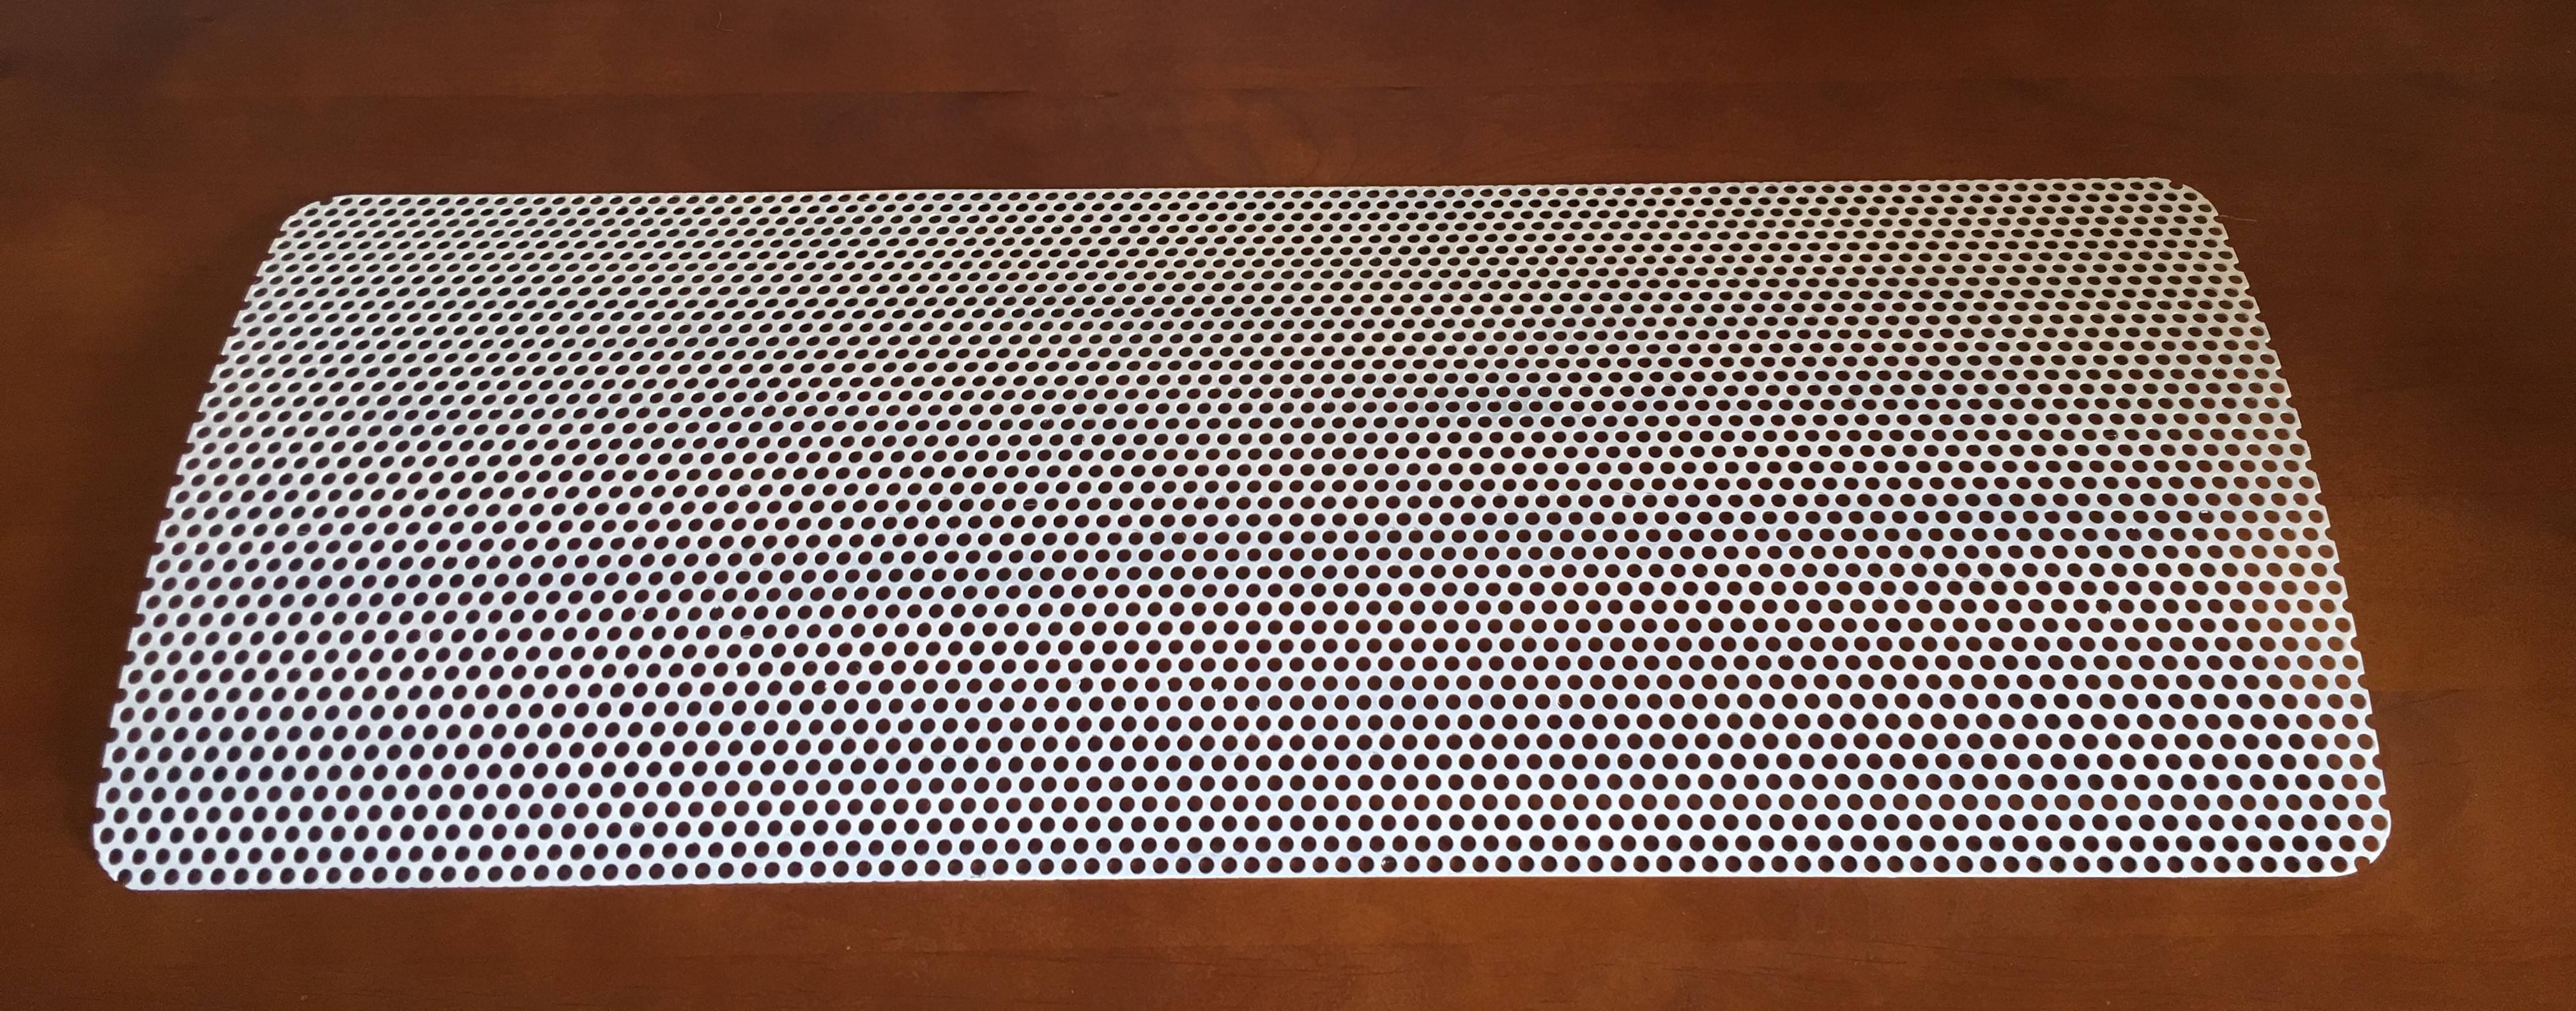 Pierre Guariche G320 Large White Perforated Metal Wall Lamp, 1952, France For Sale 2